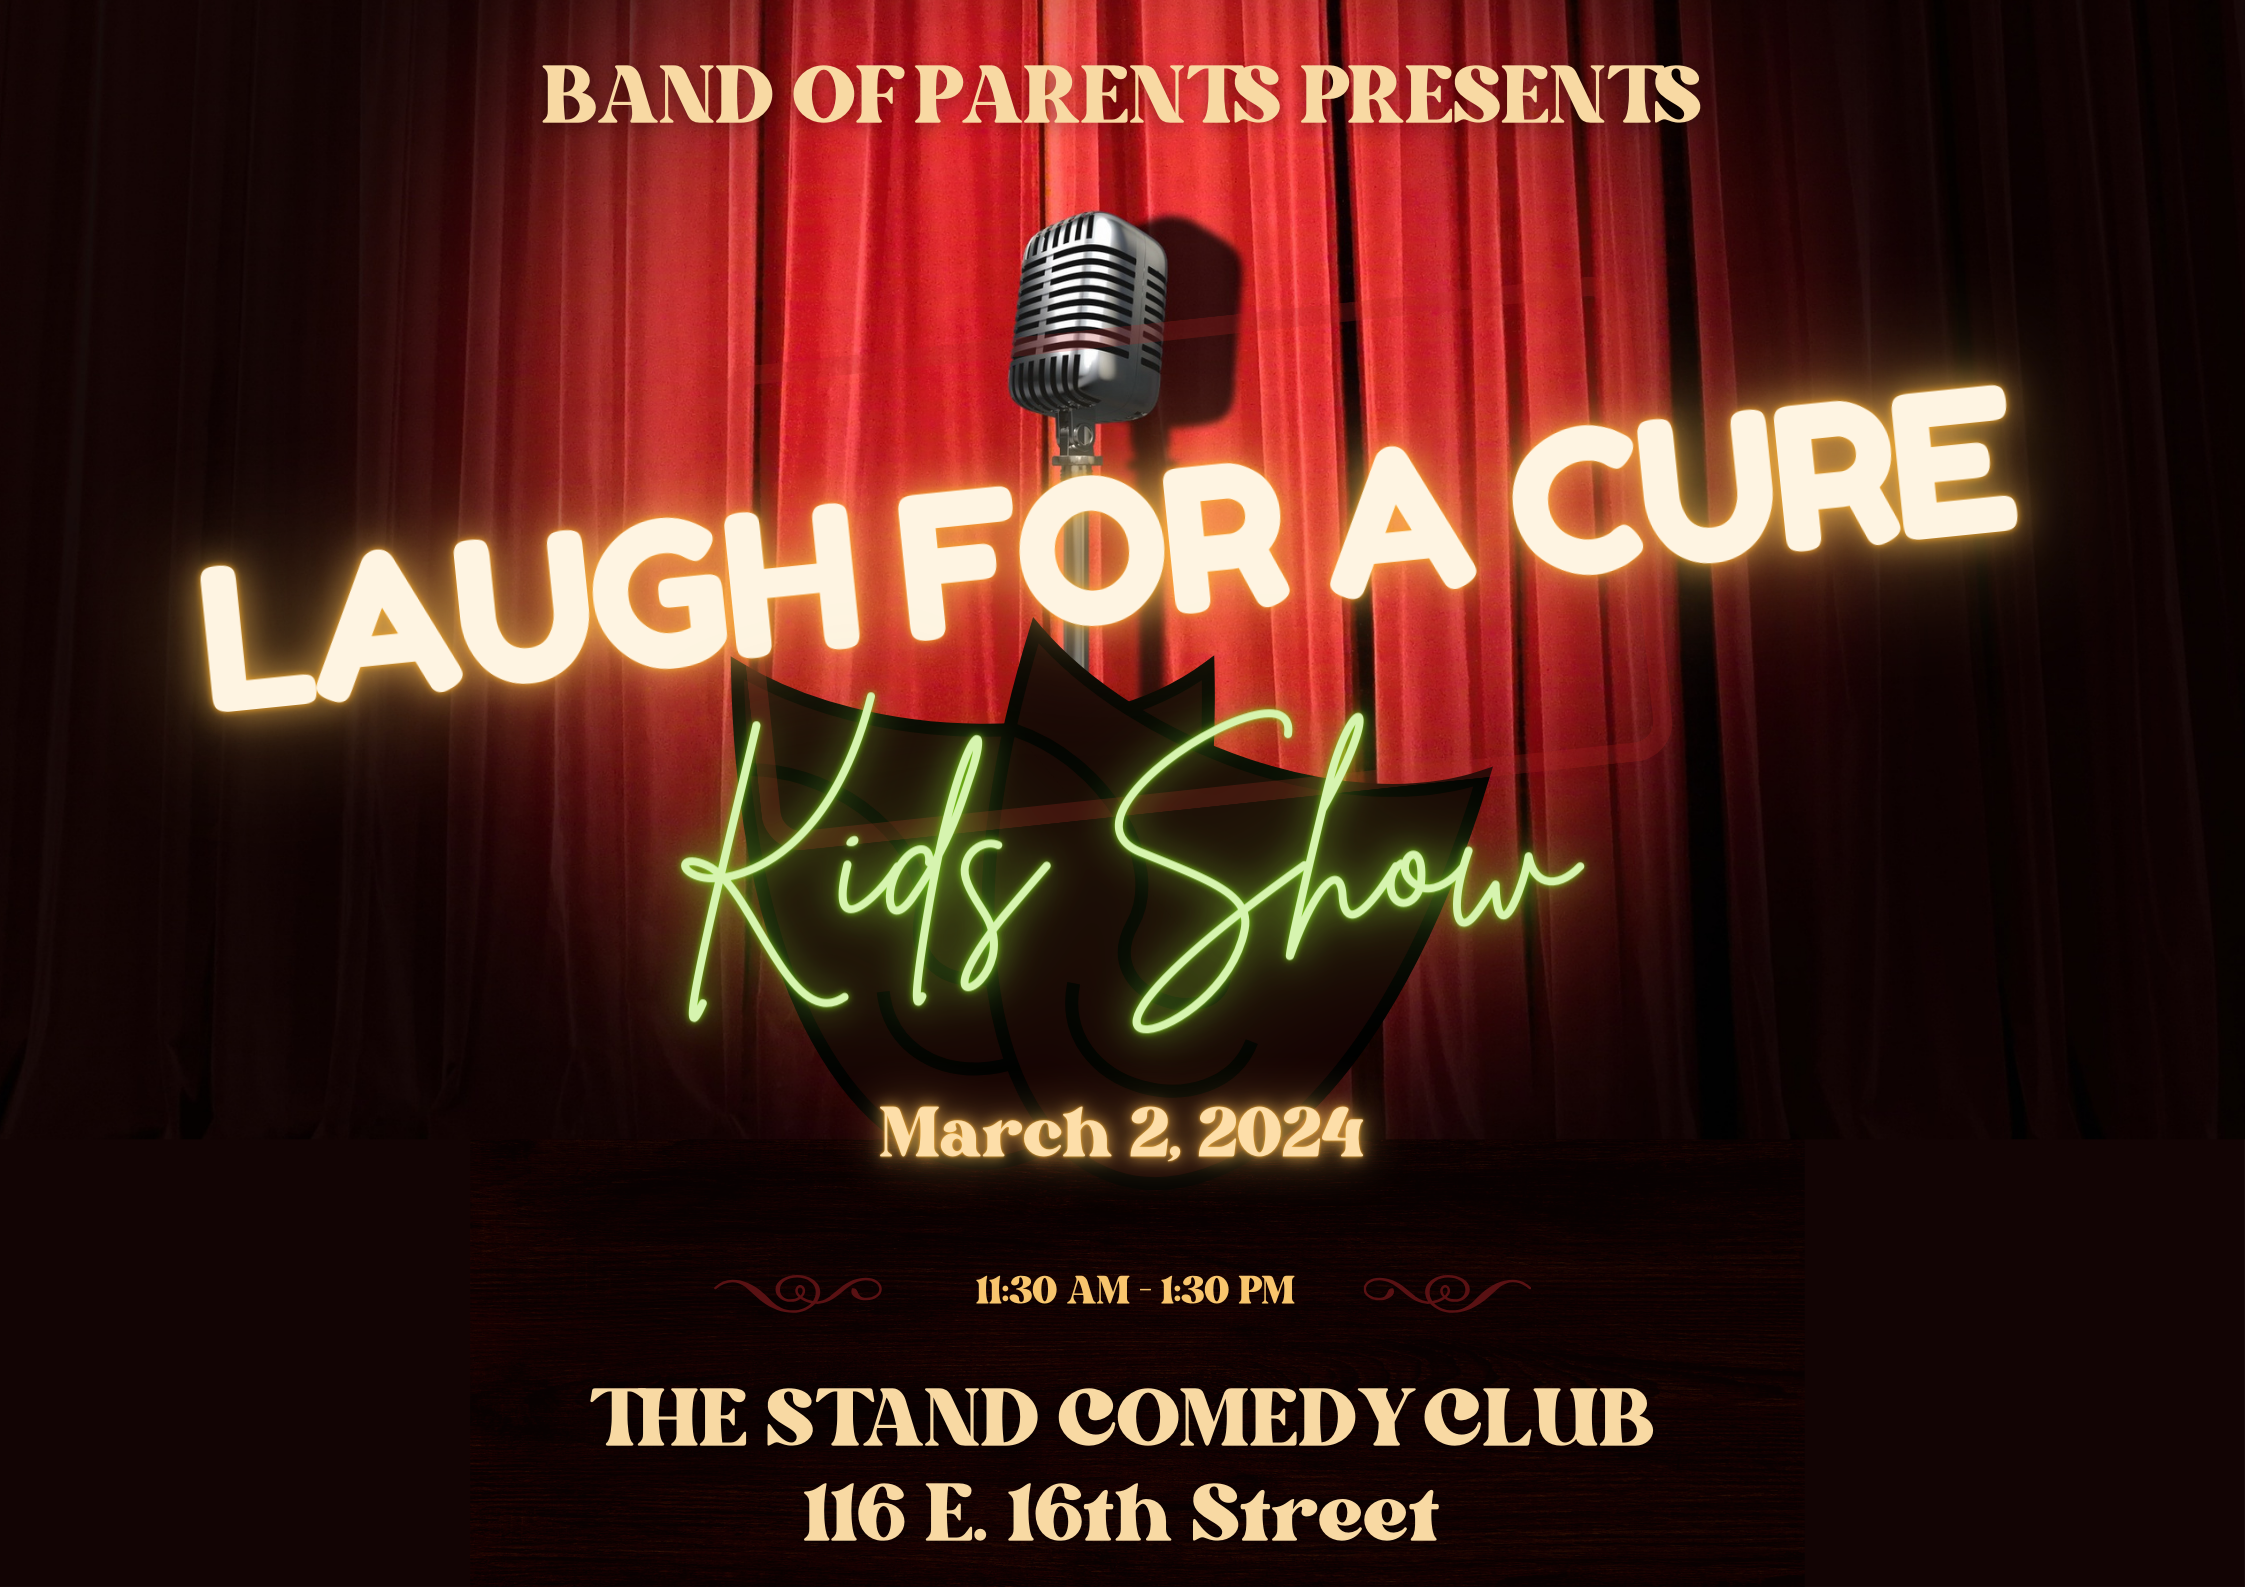 Laugh for a Cure Kids Comedy Show